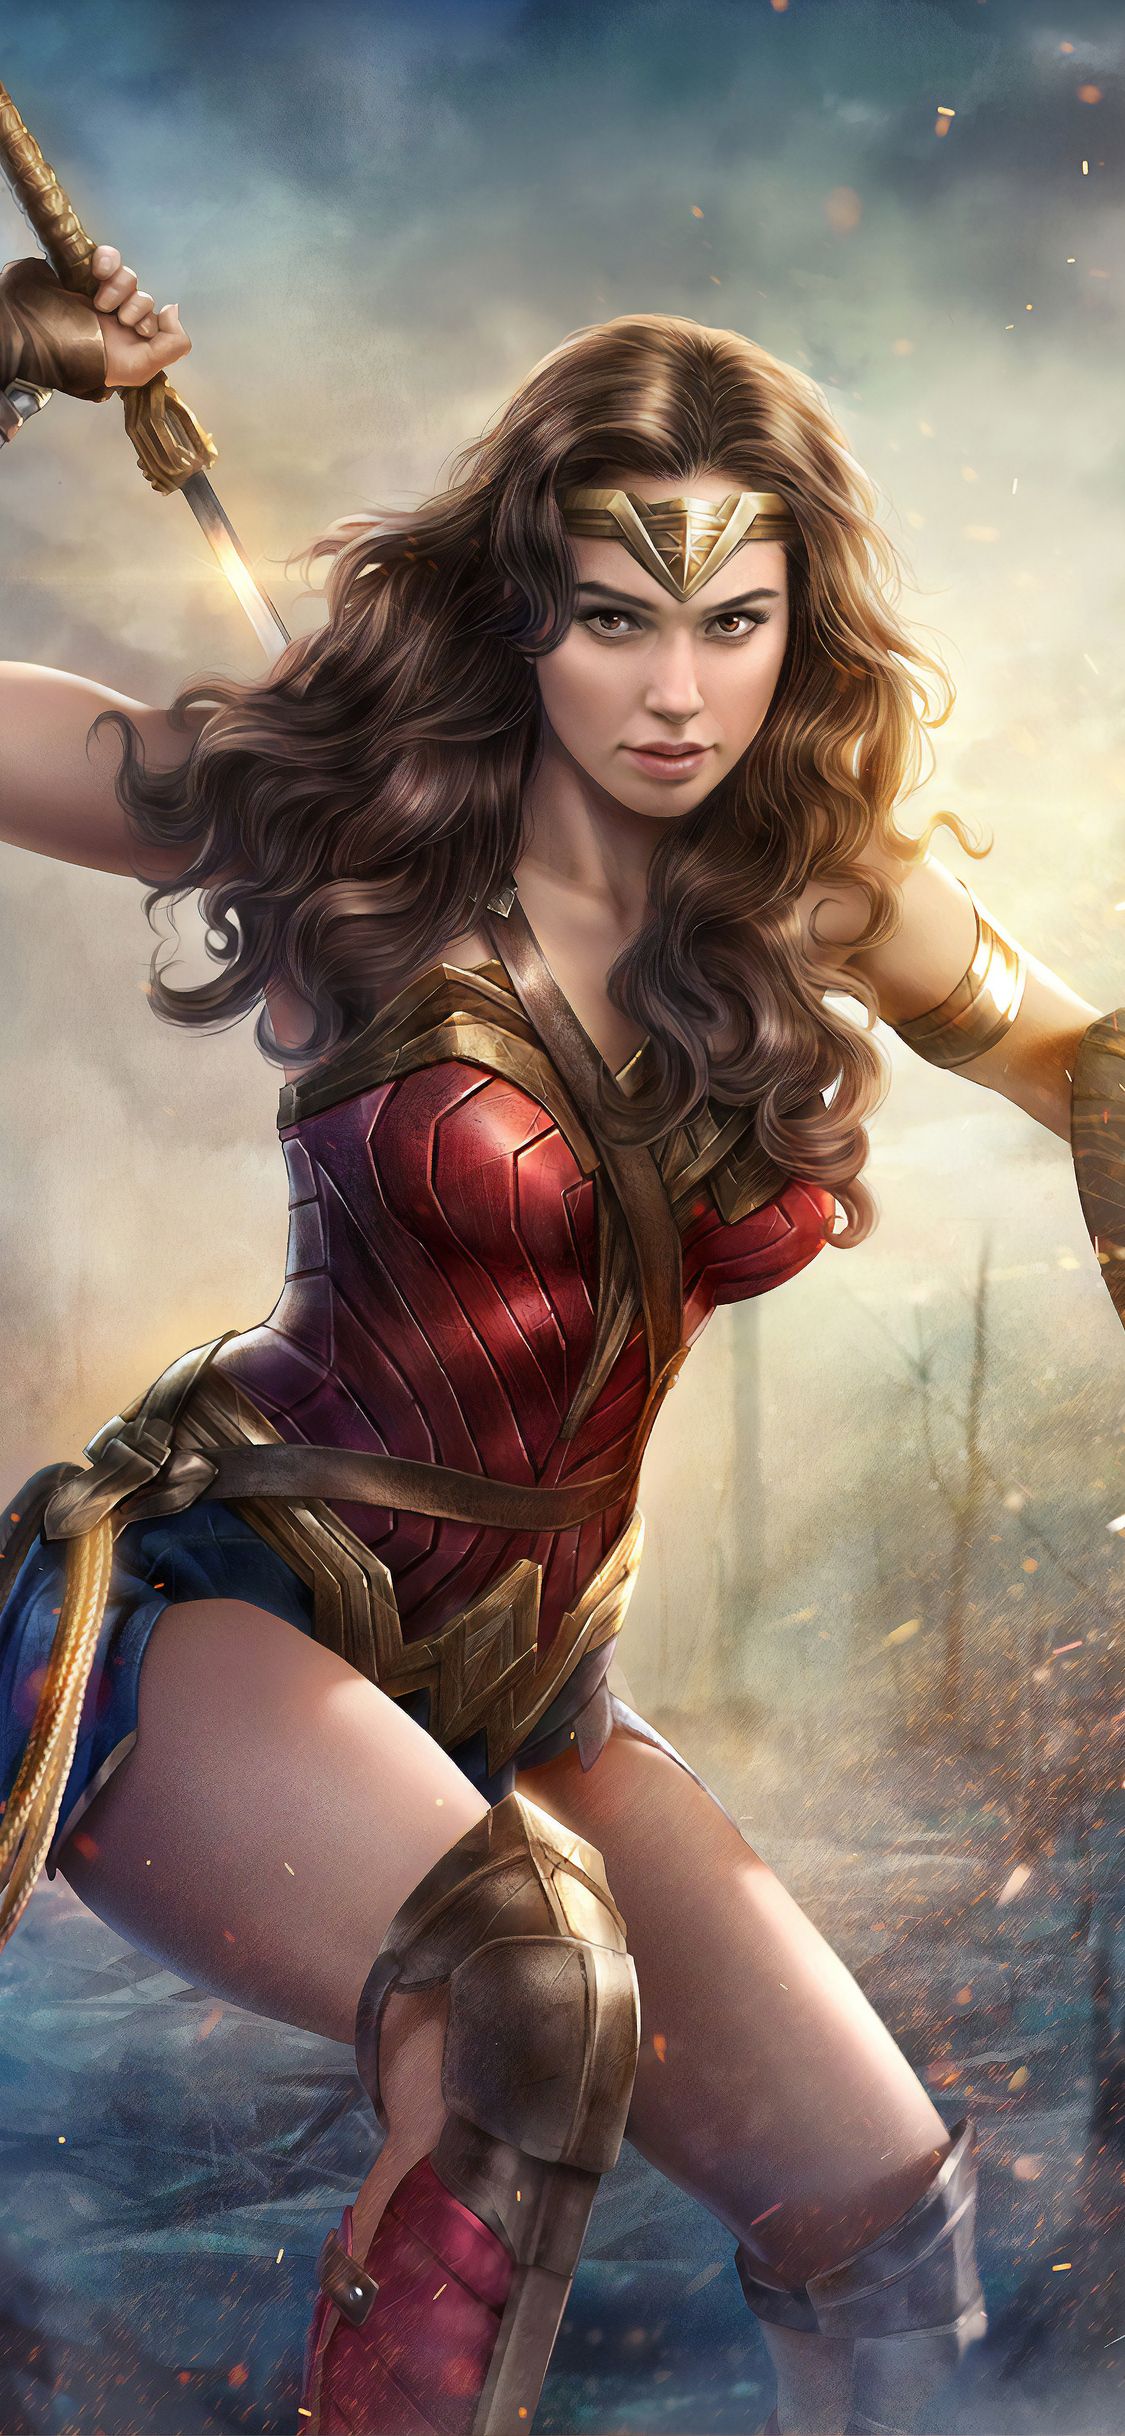 4k Gal Gadot Wonder Woman iPhone XS, iPhone iPhone X HD 4k Wallpaper, Image, Background, Photo and Picture